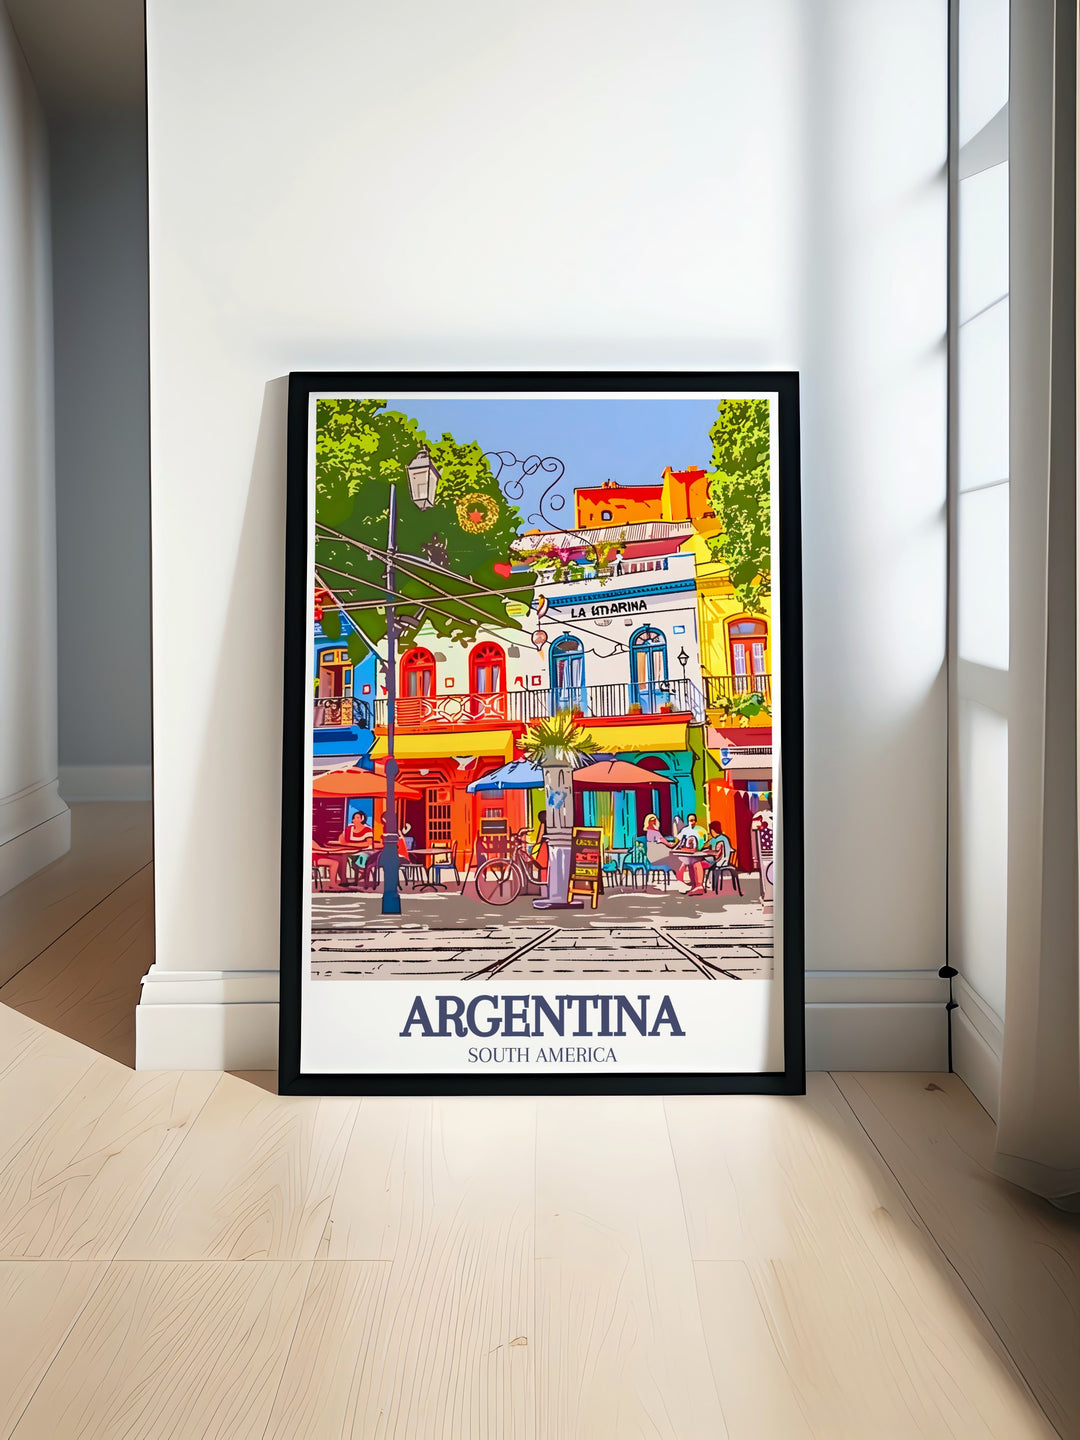 Buenos Aires, La Boca vibrant travel poster featuring colorful buildings and lively street scenes. Perfect for adding a touch of Argentina decor to your home or office. The print highlights the dynamic atmosphere of one of Buenos Aires most famous neighborhoods.